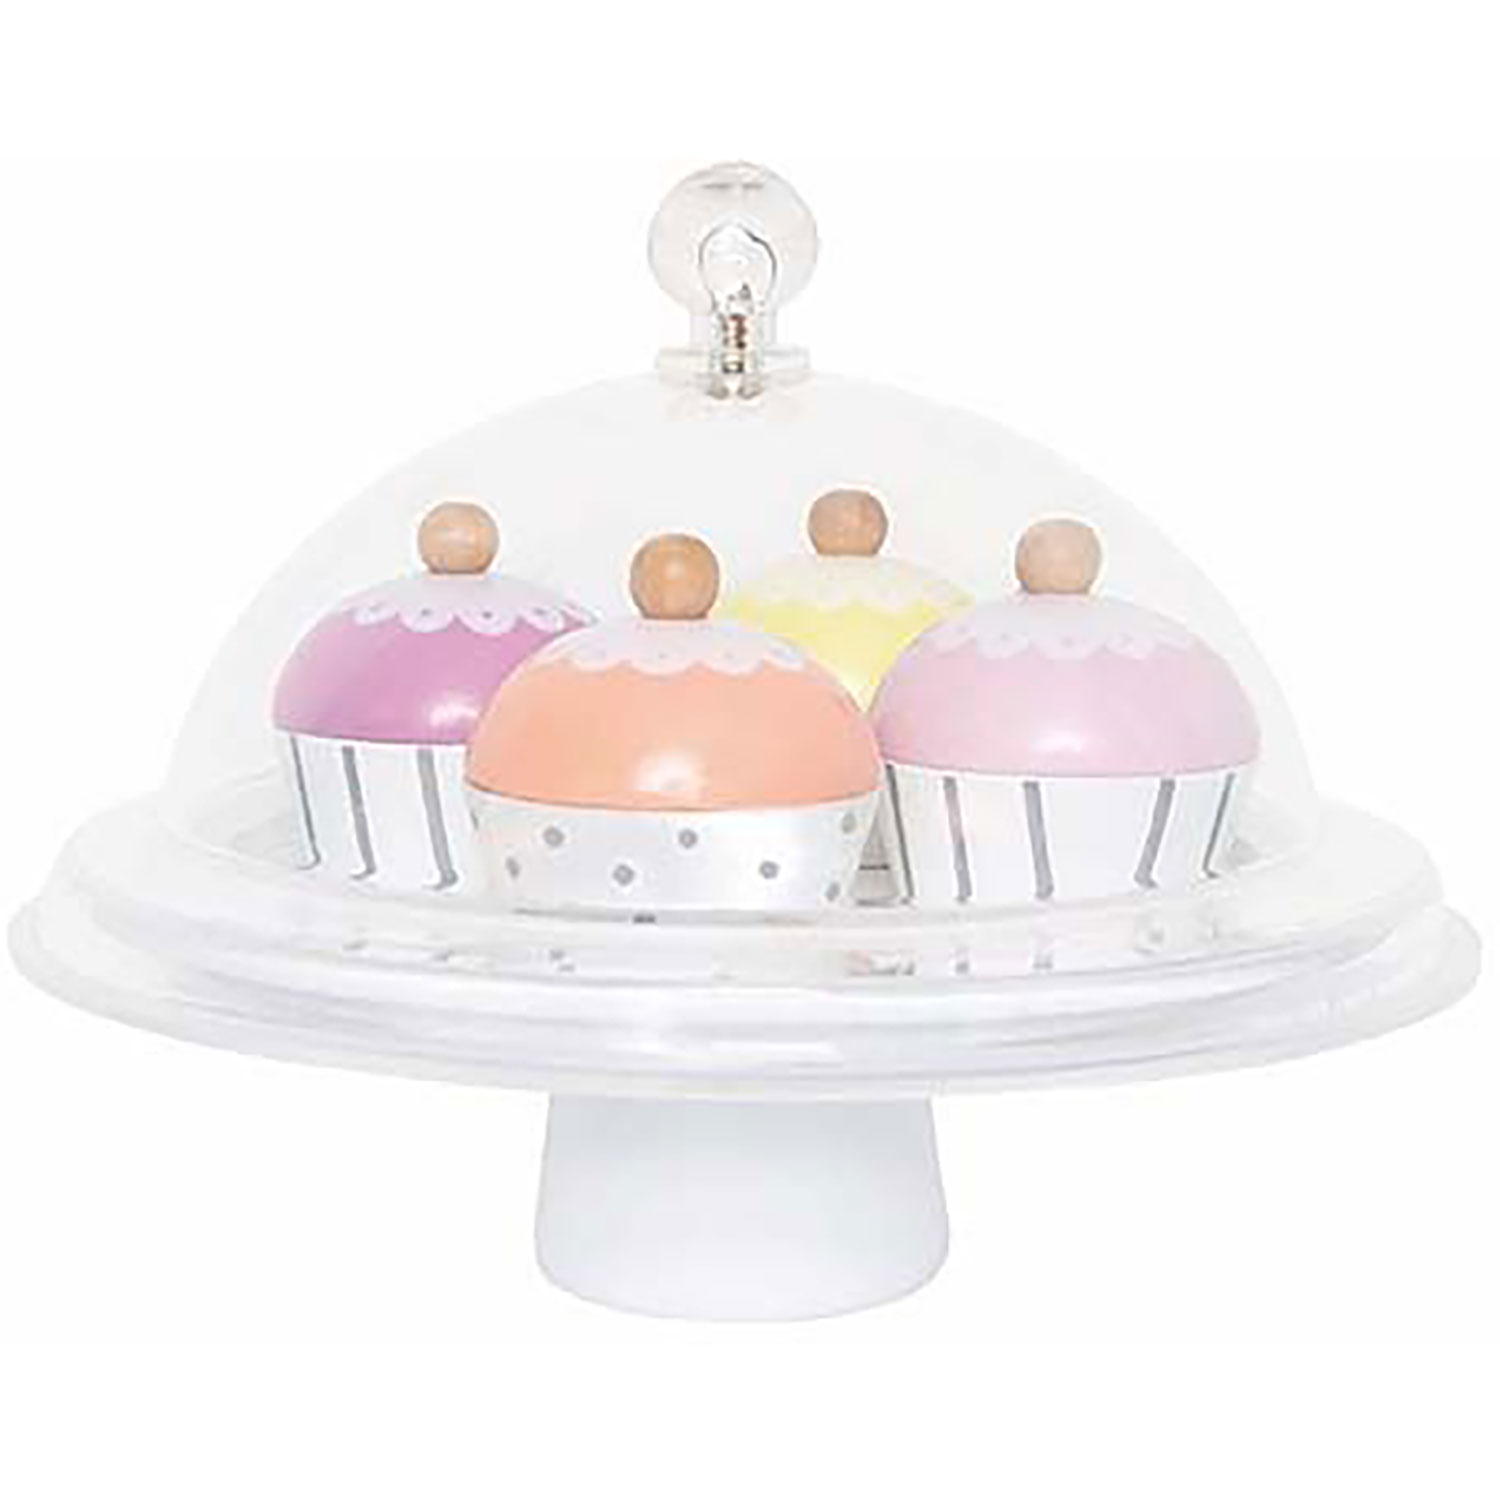 Alessi 3 Sets Dessert Display Stand Cake Dome Stand Cupcake Holder Cake Serving Plate 